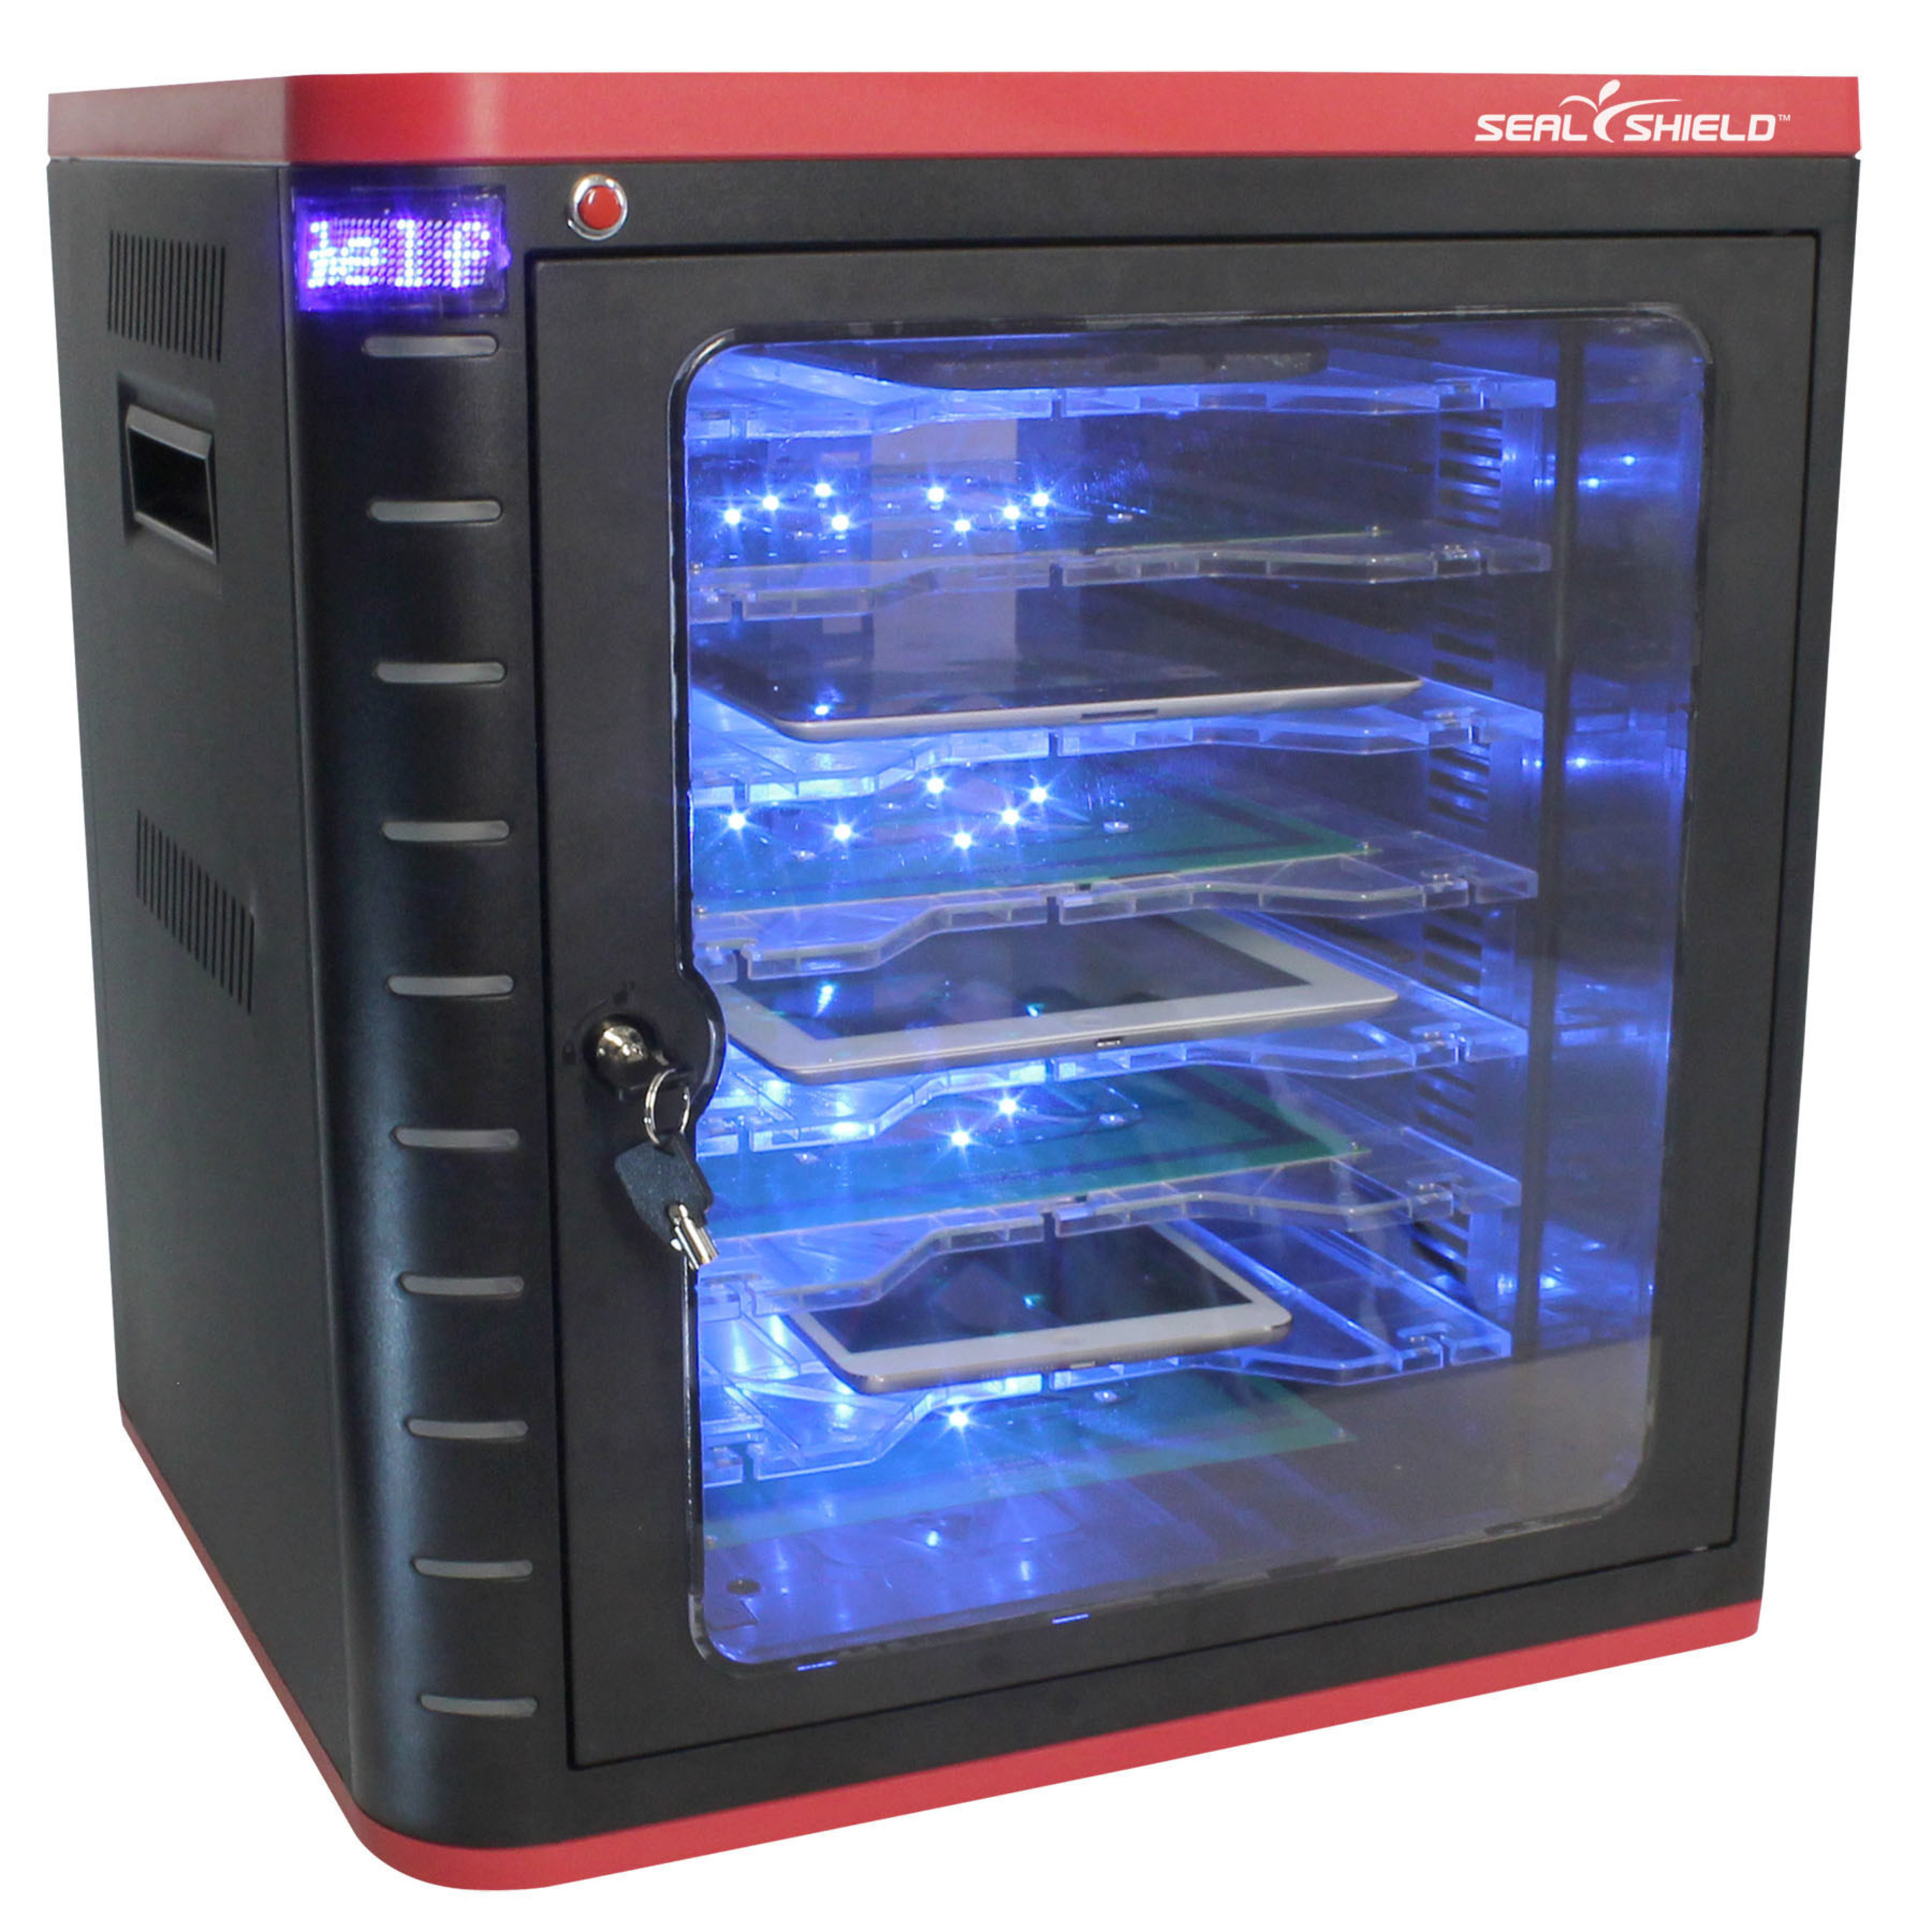 The Seal Shield ElectroClave(TM), is the world's first mobile device sanitizer to use new, high efficacy UVC LED technology which has the advantages of low power and low heat. These features, combined with Seal Shield's proprietary smart charging technology allow electronic devices to be charged and synced while they sanitize.